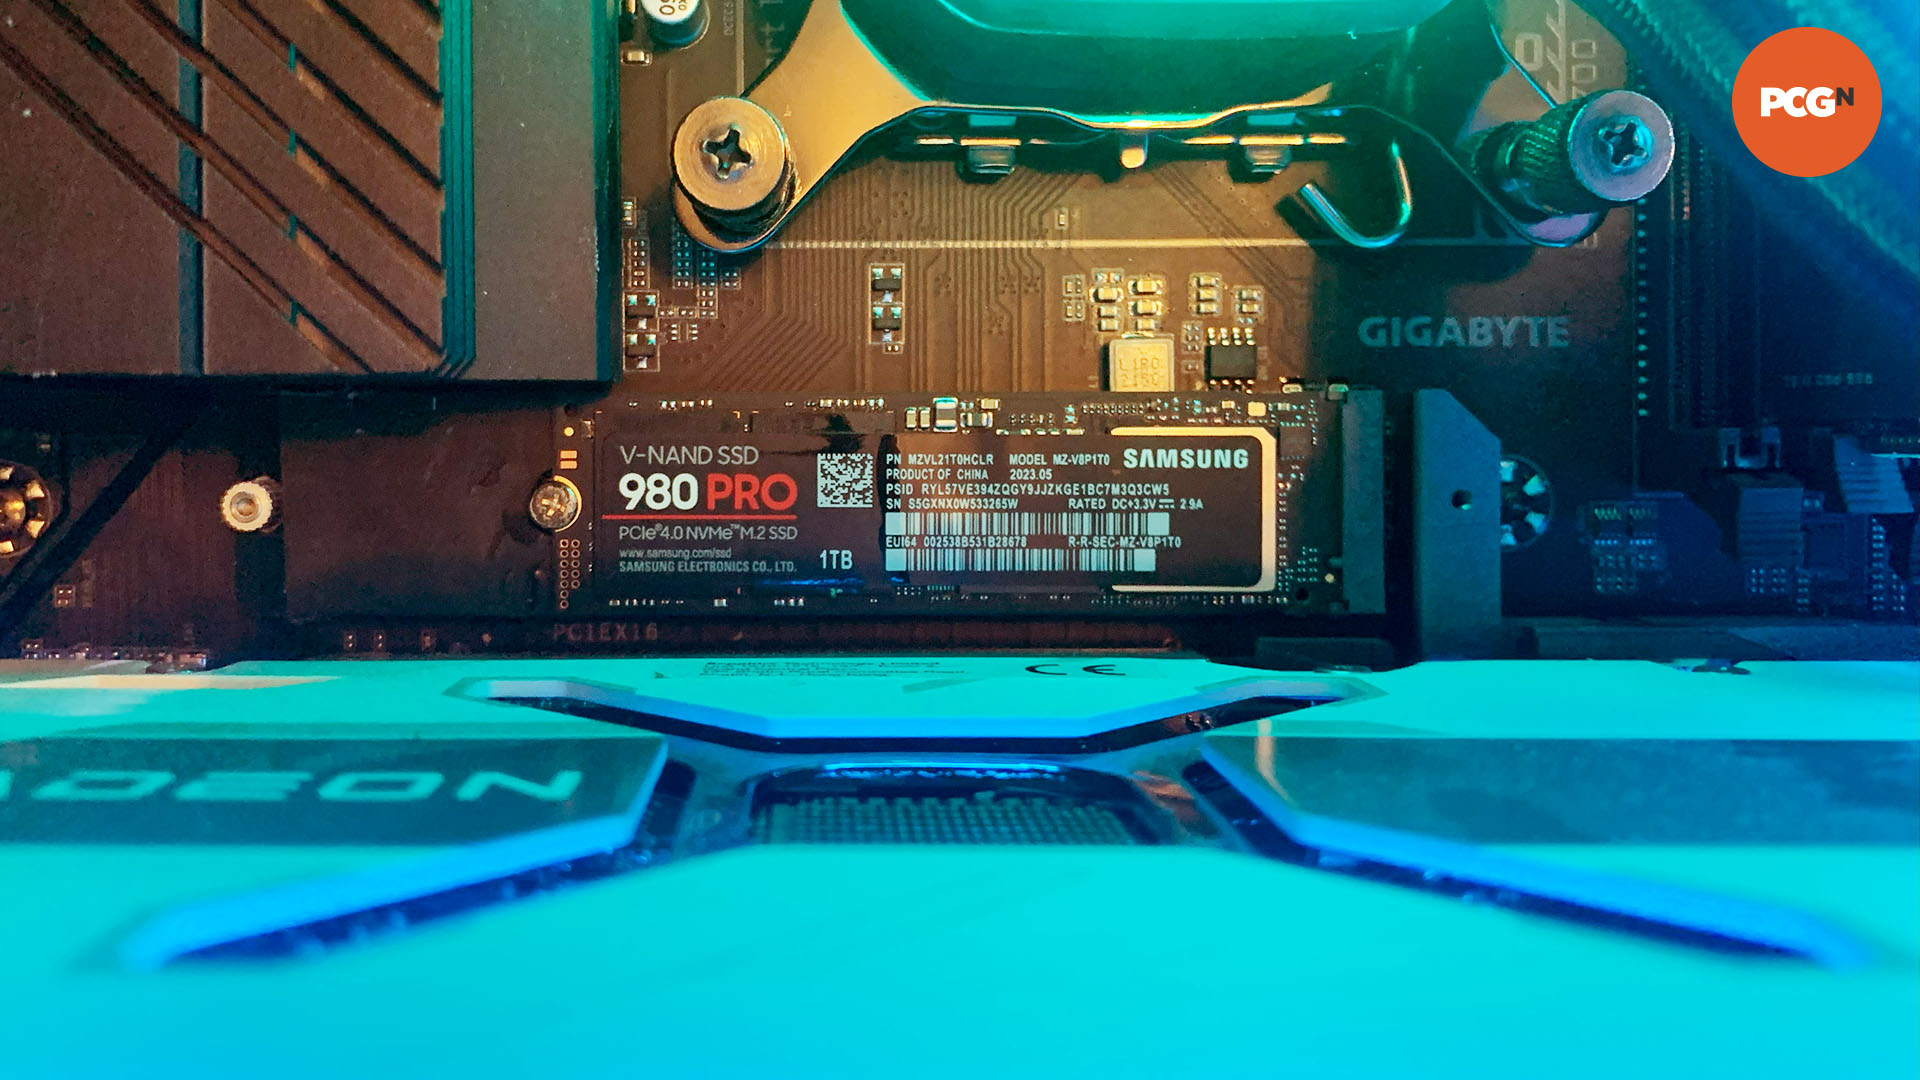 Samsung 980 Pro review: SSD installed in Gigabyte motherboard